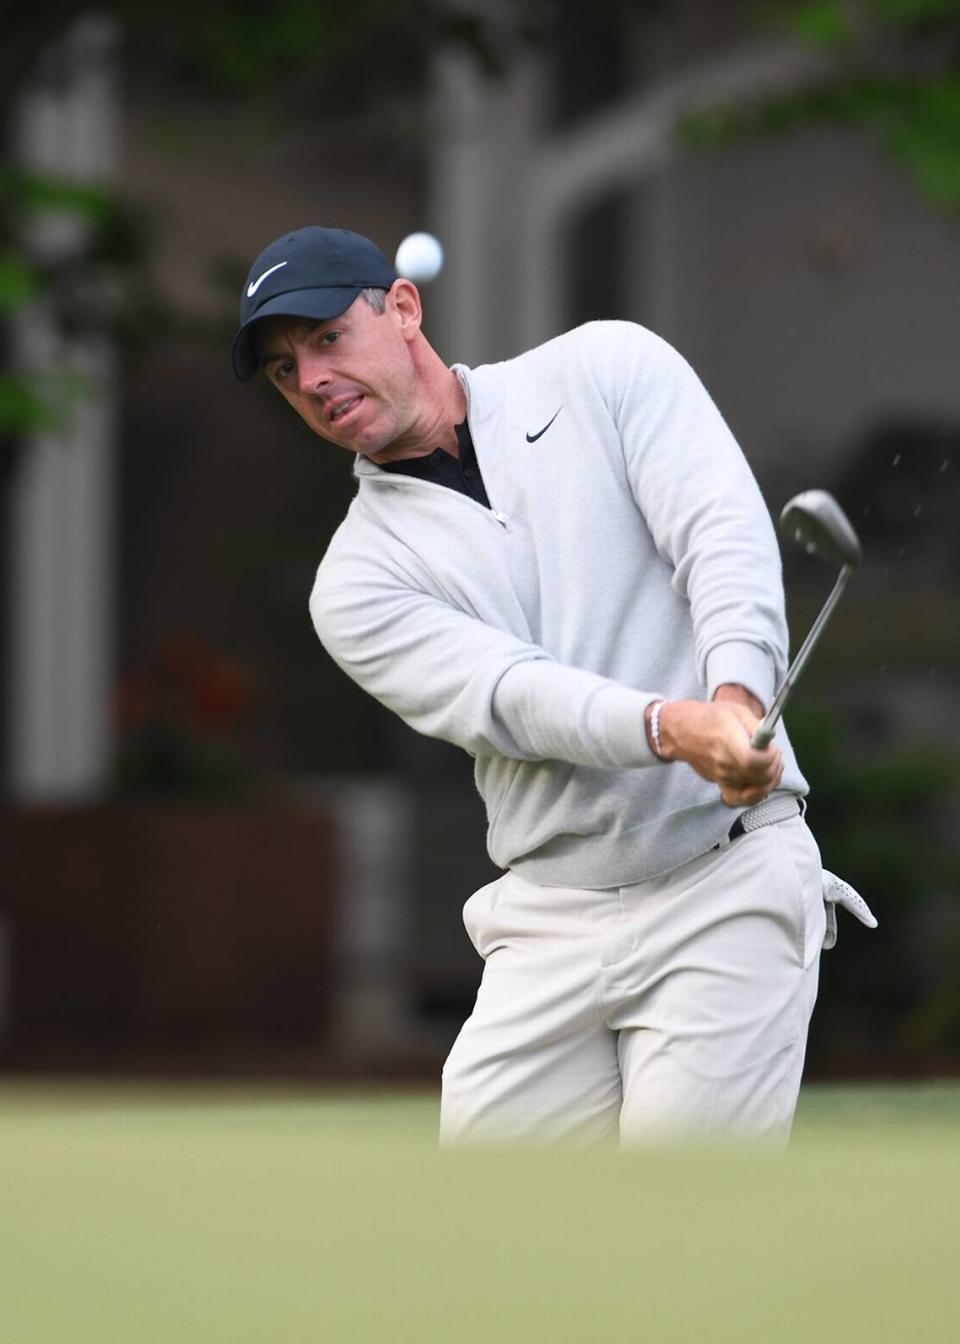 World no. 2 Rory McIlroy chips to three inches on hole no. 5 during the Wednesday pro-am at Harbour Town Golf Links in advance of the RBC Heritage Tournament.